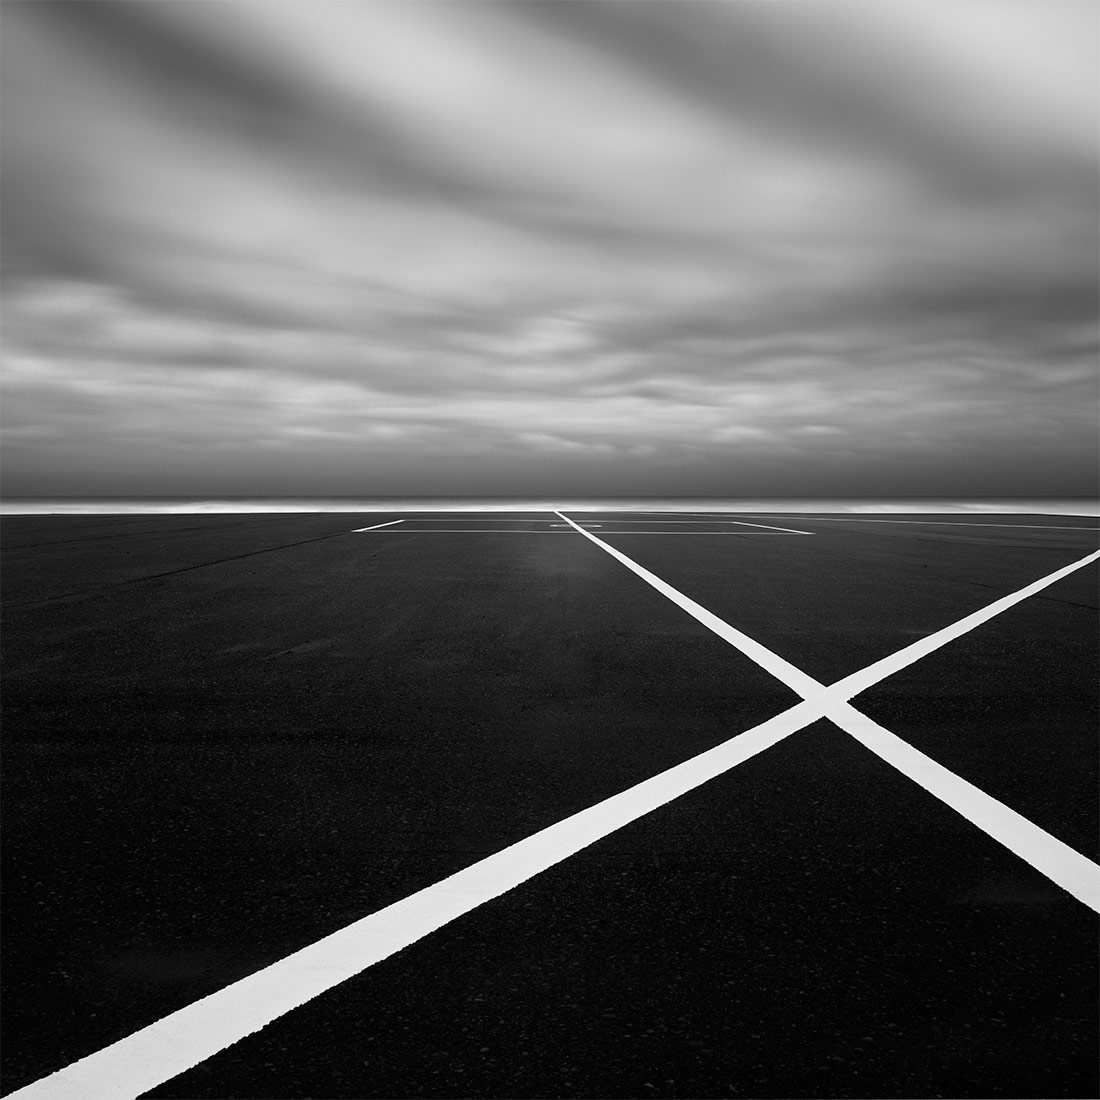 Rhythm, © Hironori Nakamura, 1st Place - Black & White Abstract Series of the Year 2018, MonoVisions Photography Awards